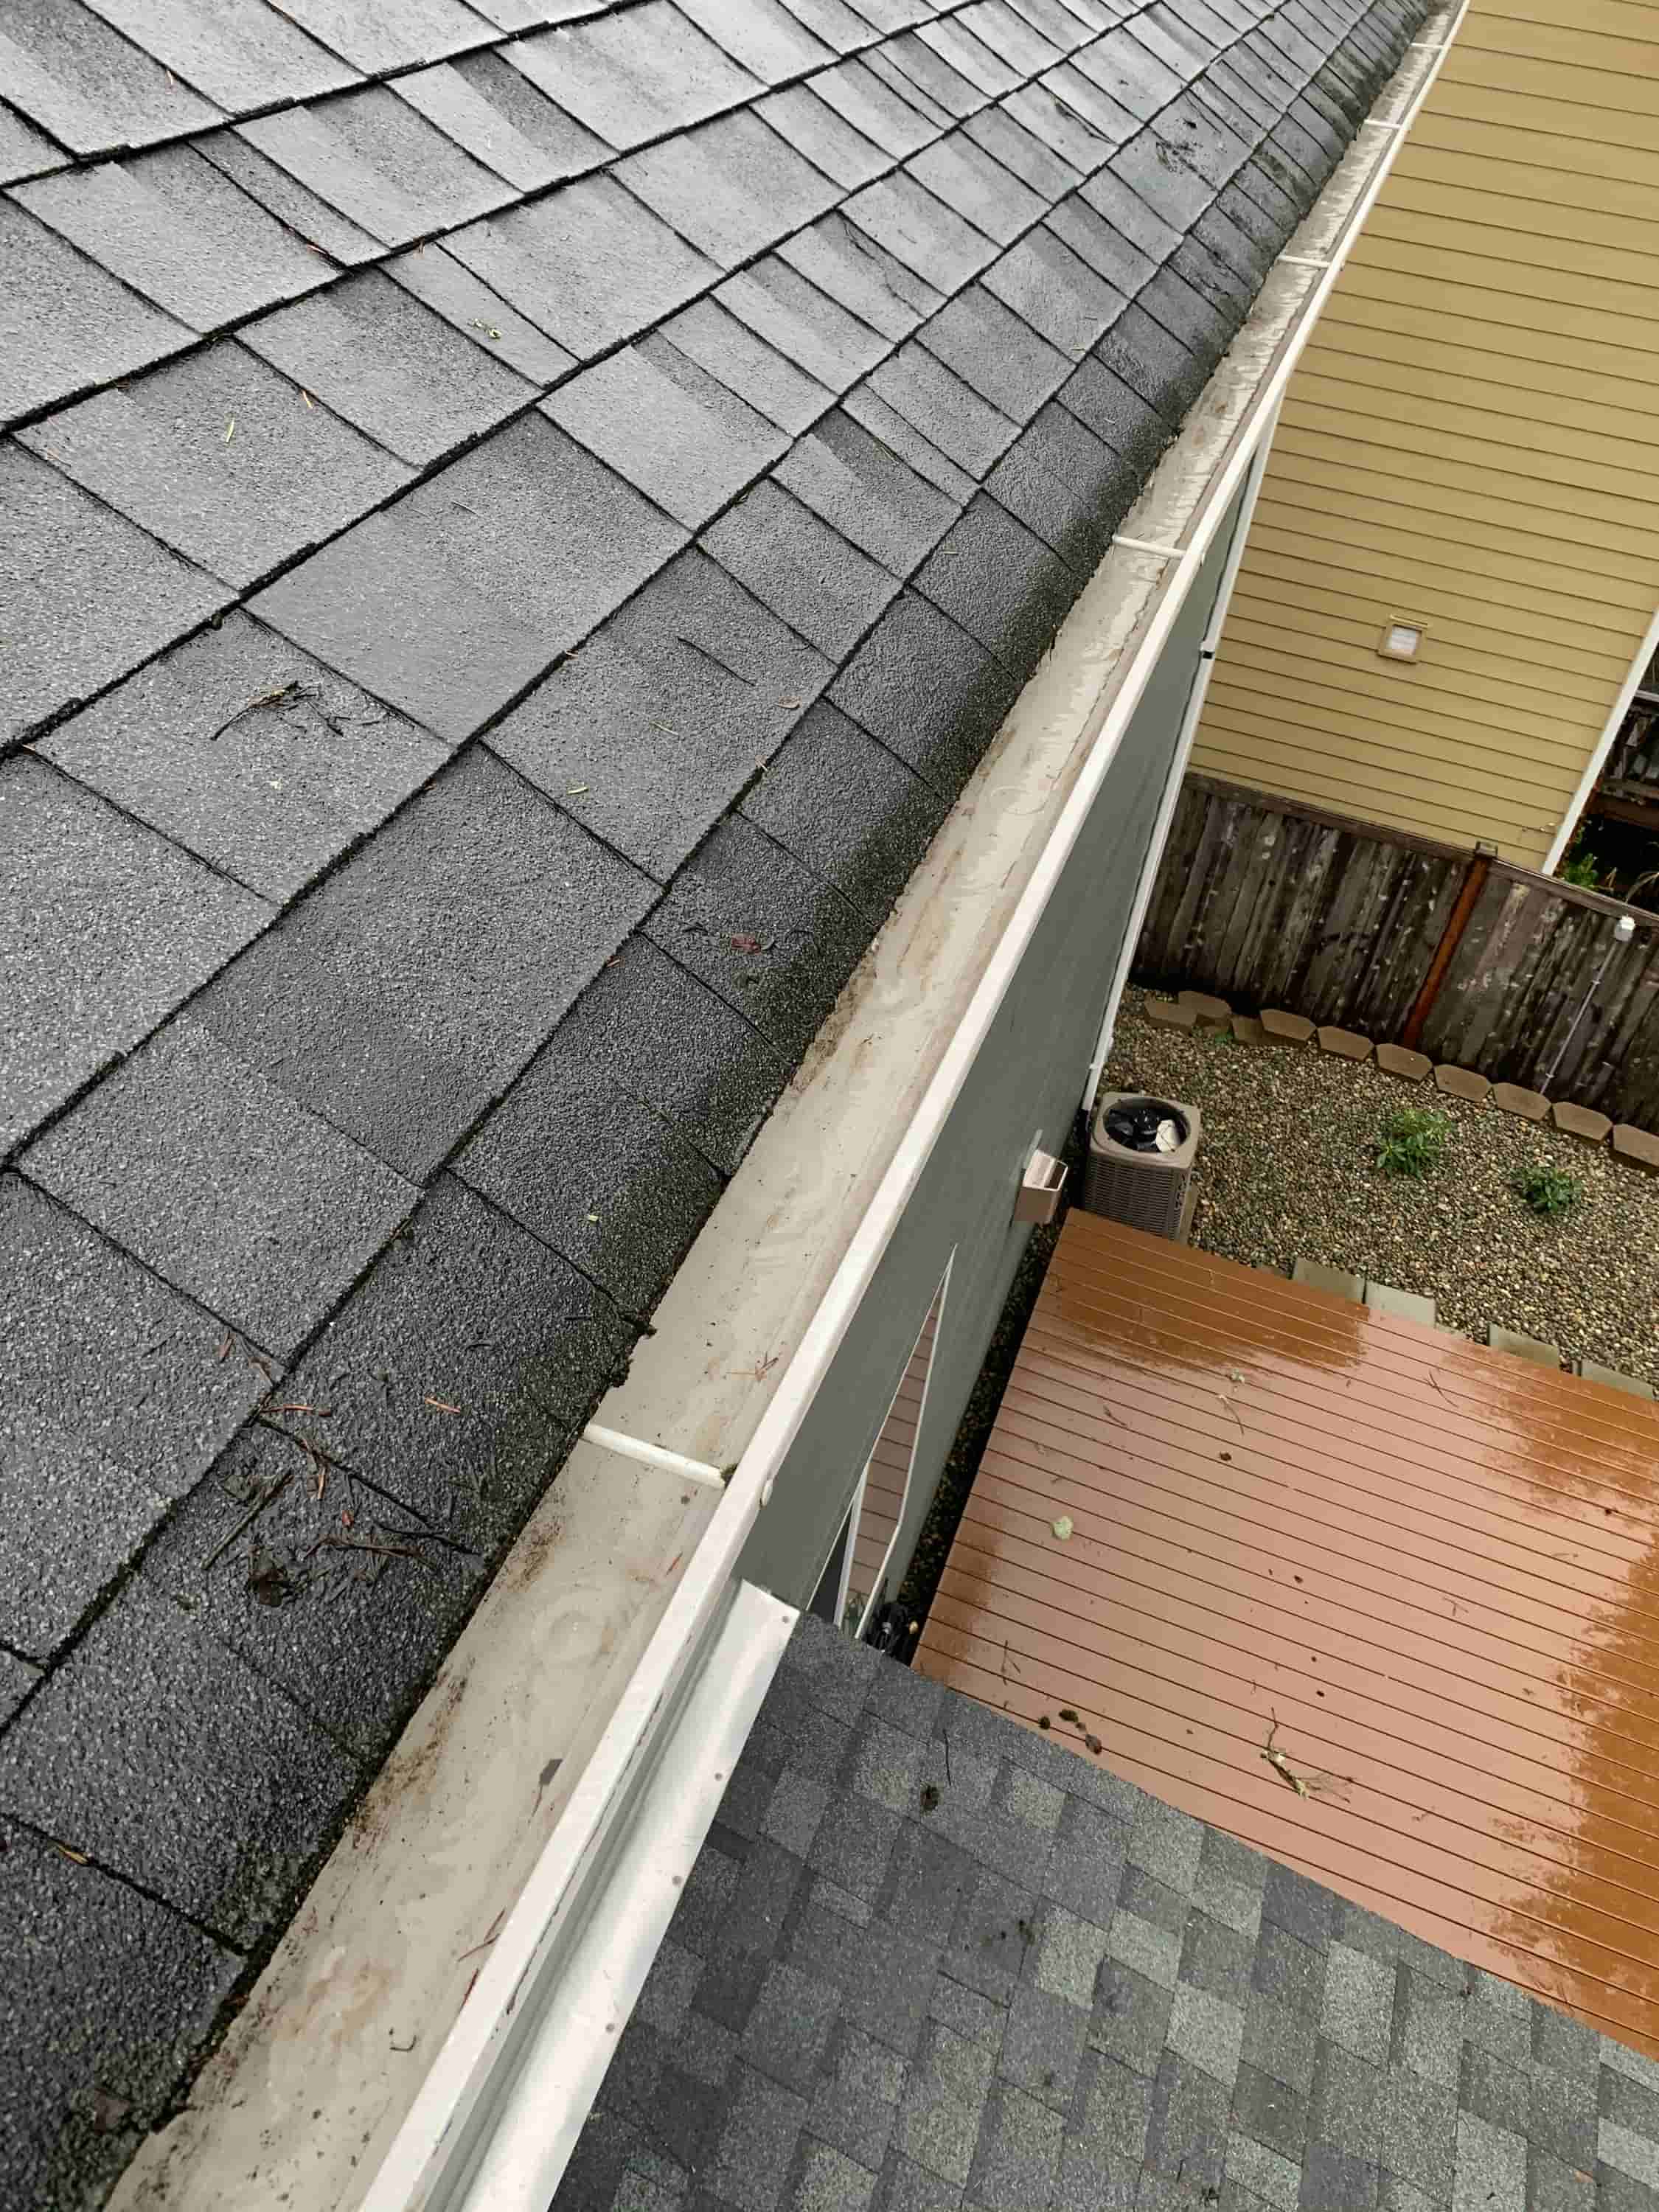 cleaning out gutters tips